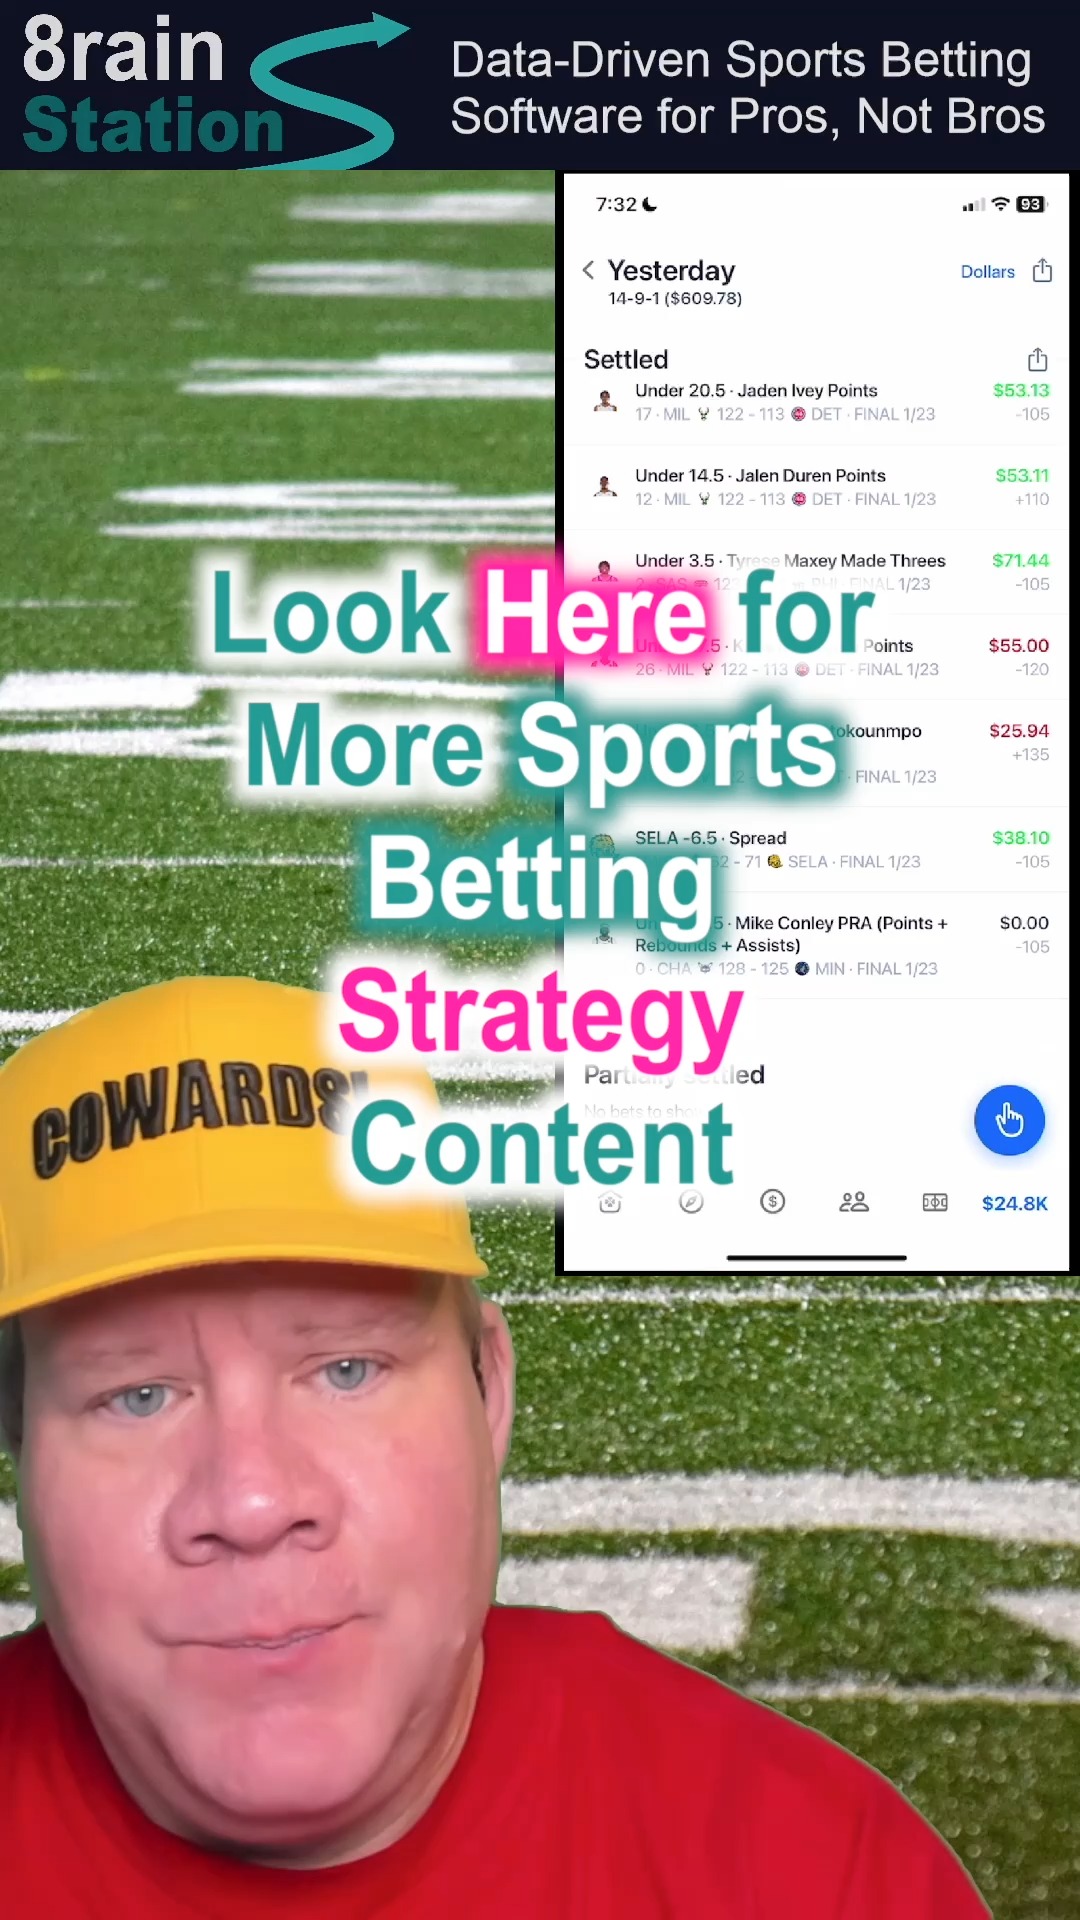 Look Here for More Sports Betting Strategy Content